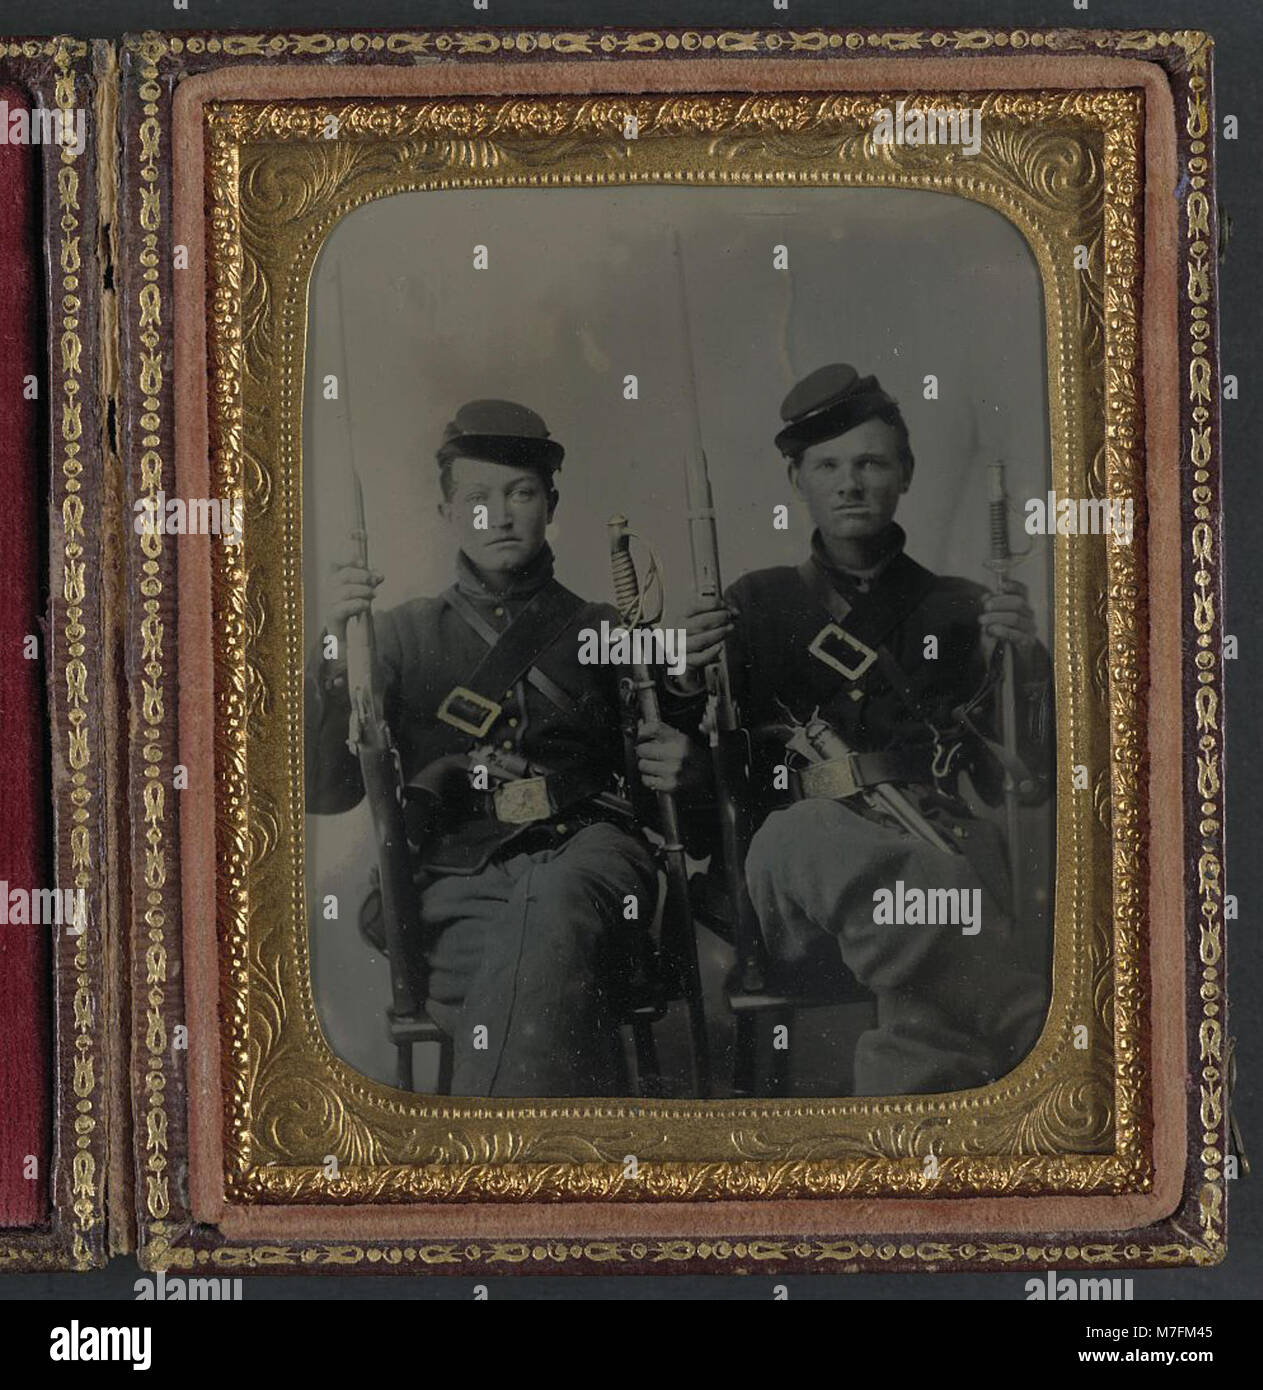 Two unidentified soldiers with Spencer carbines, 1860 sabers, and Colt Army revolvers, probably Union uniforms LCCN2011648539 Stock Photo